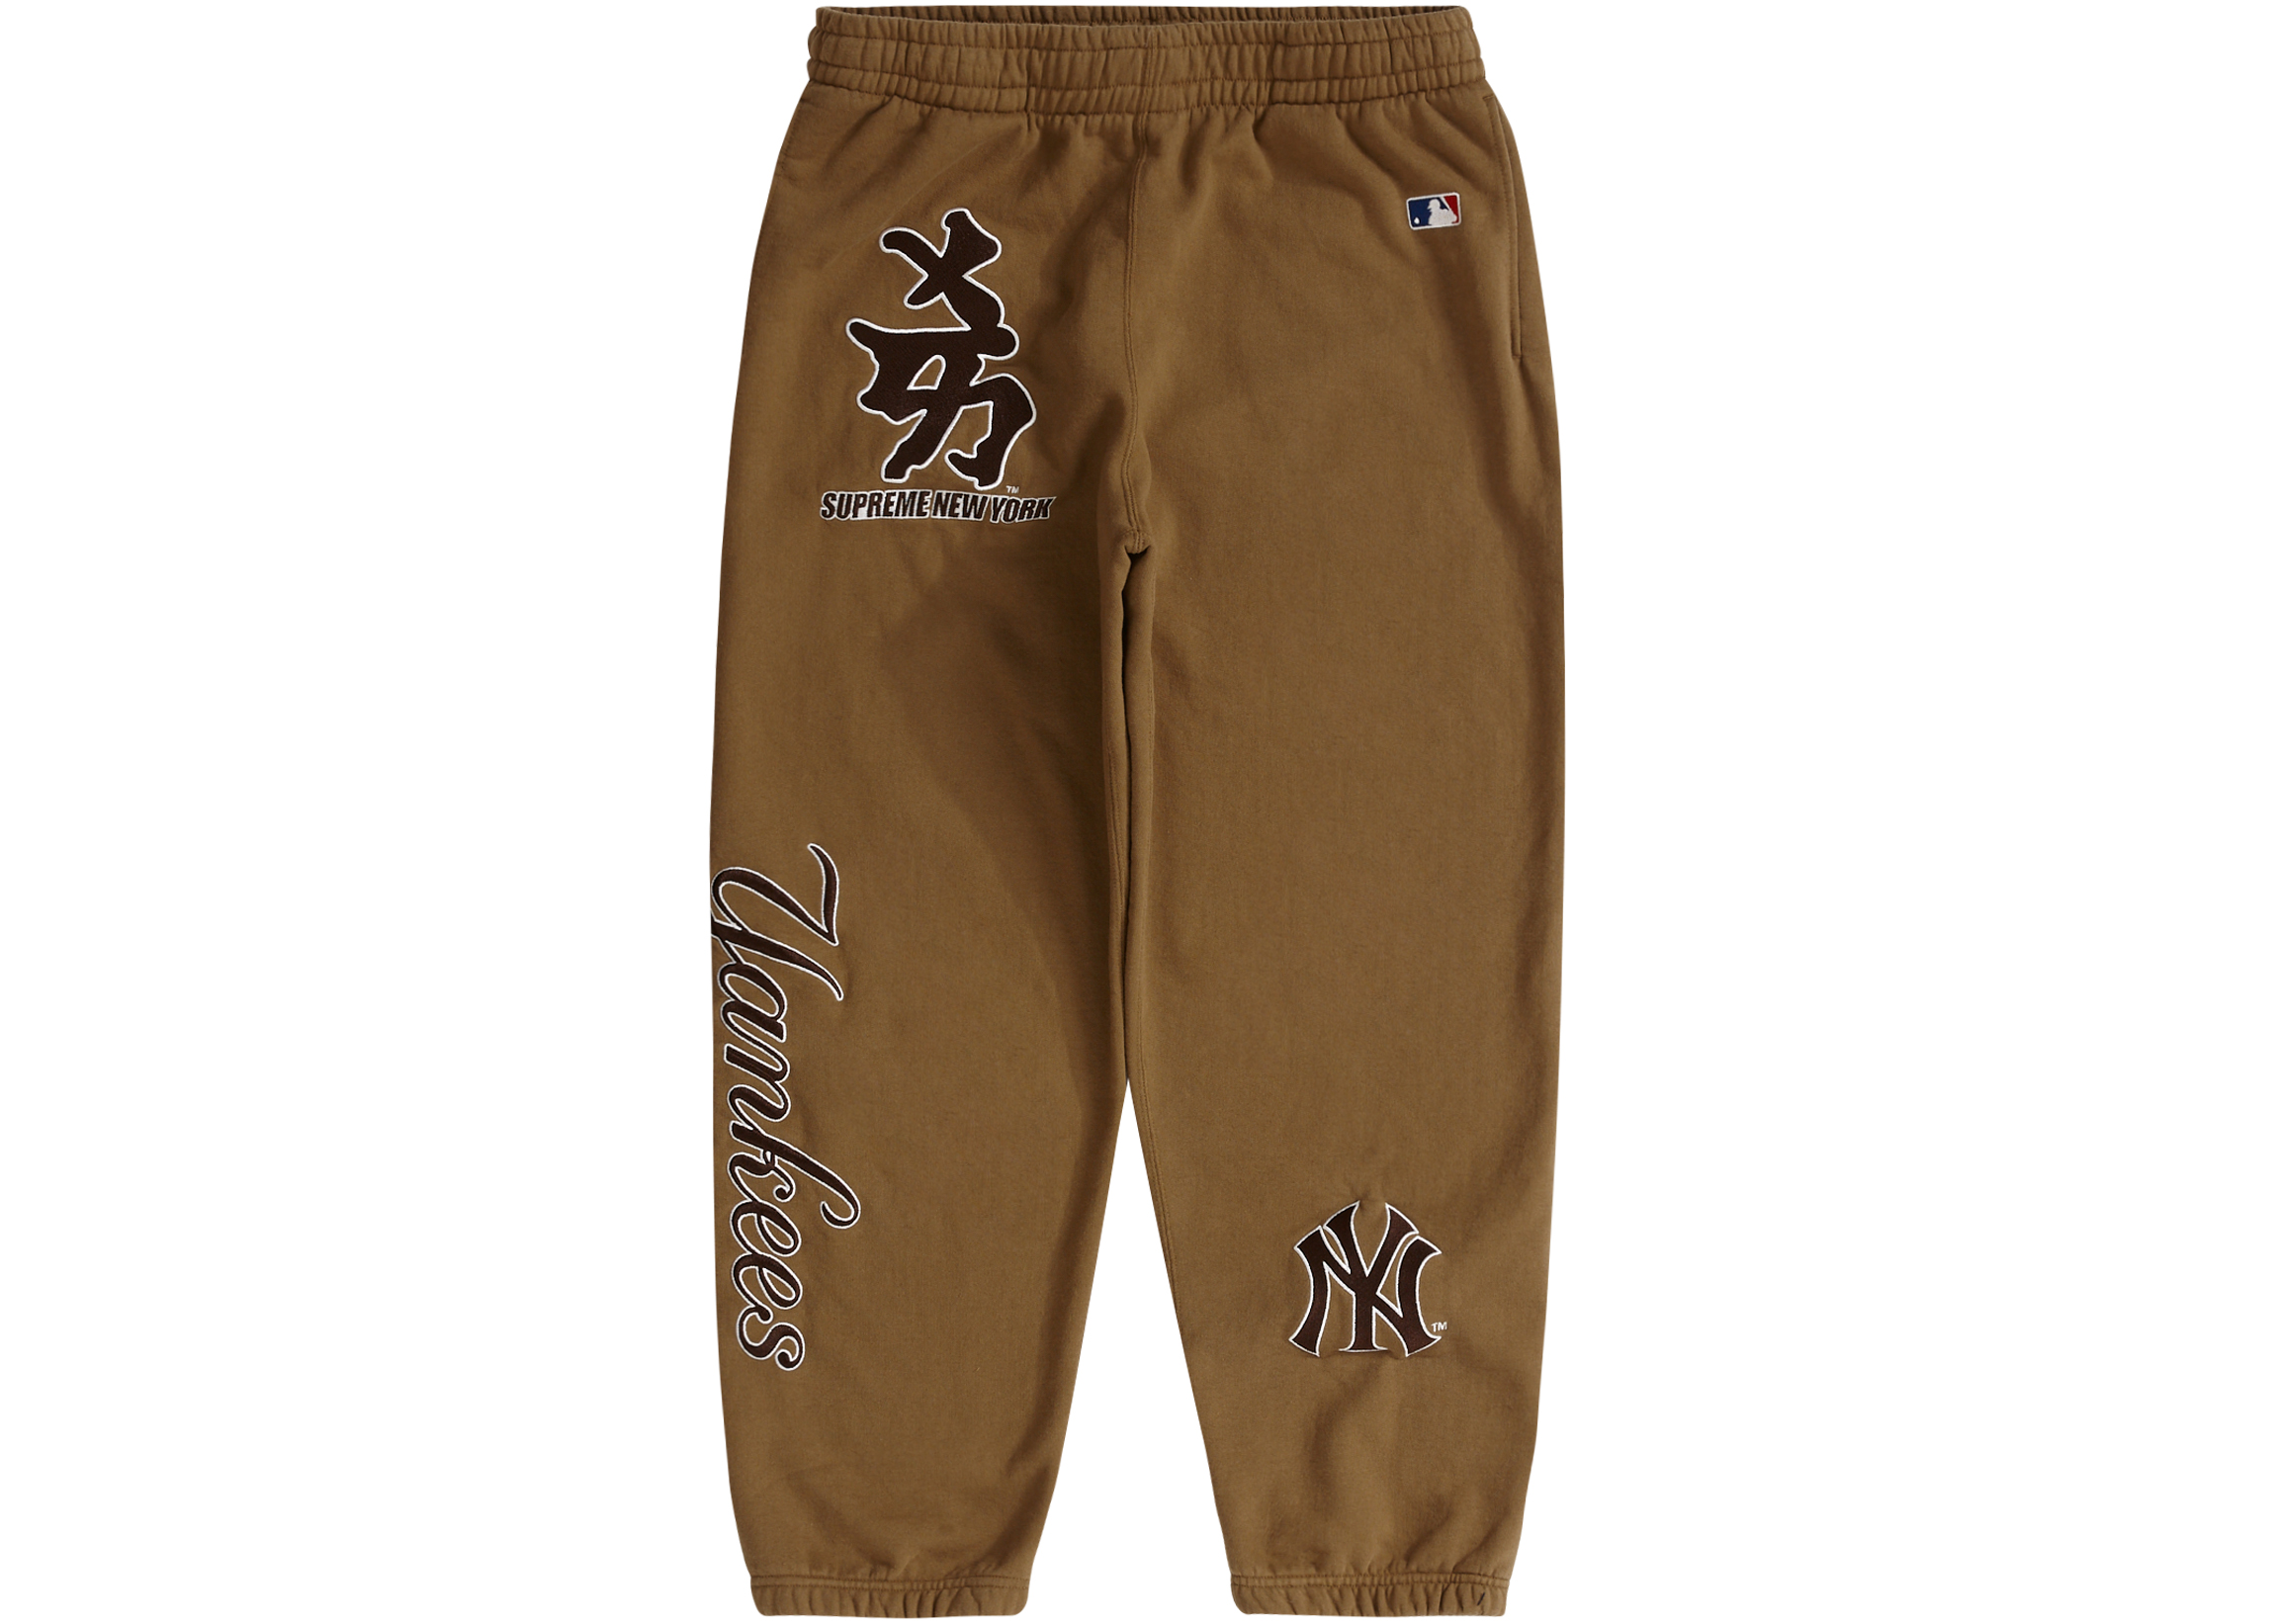 images.stockx.com/images/Supreme-New-York-Yankees-...